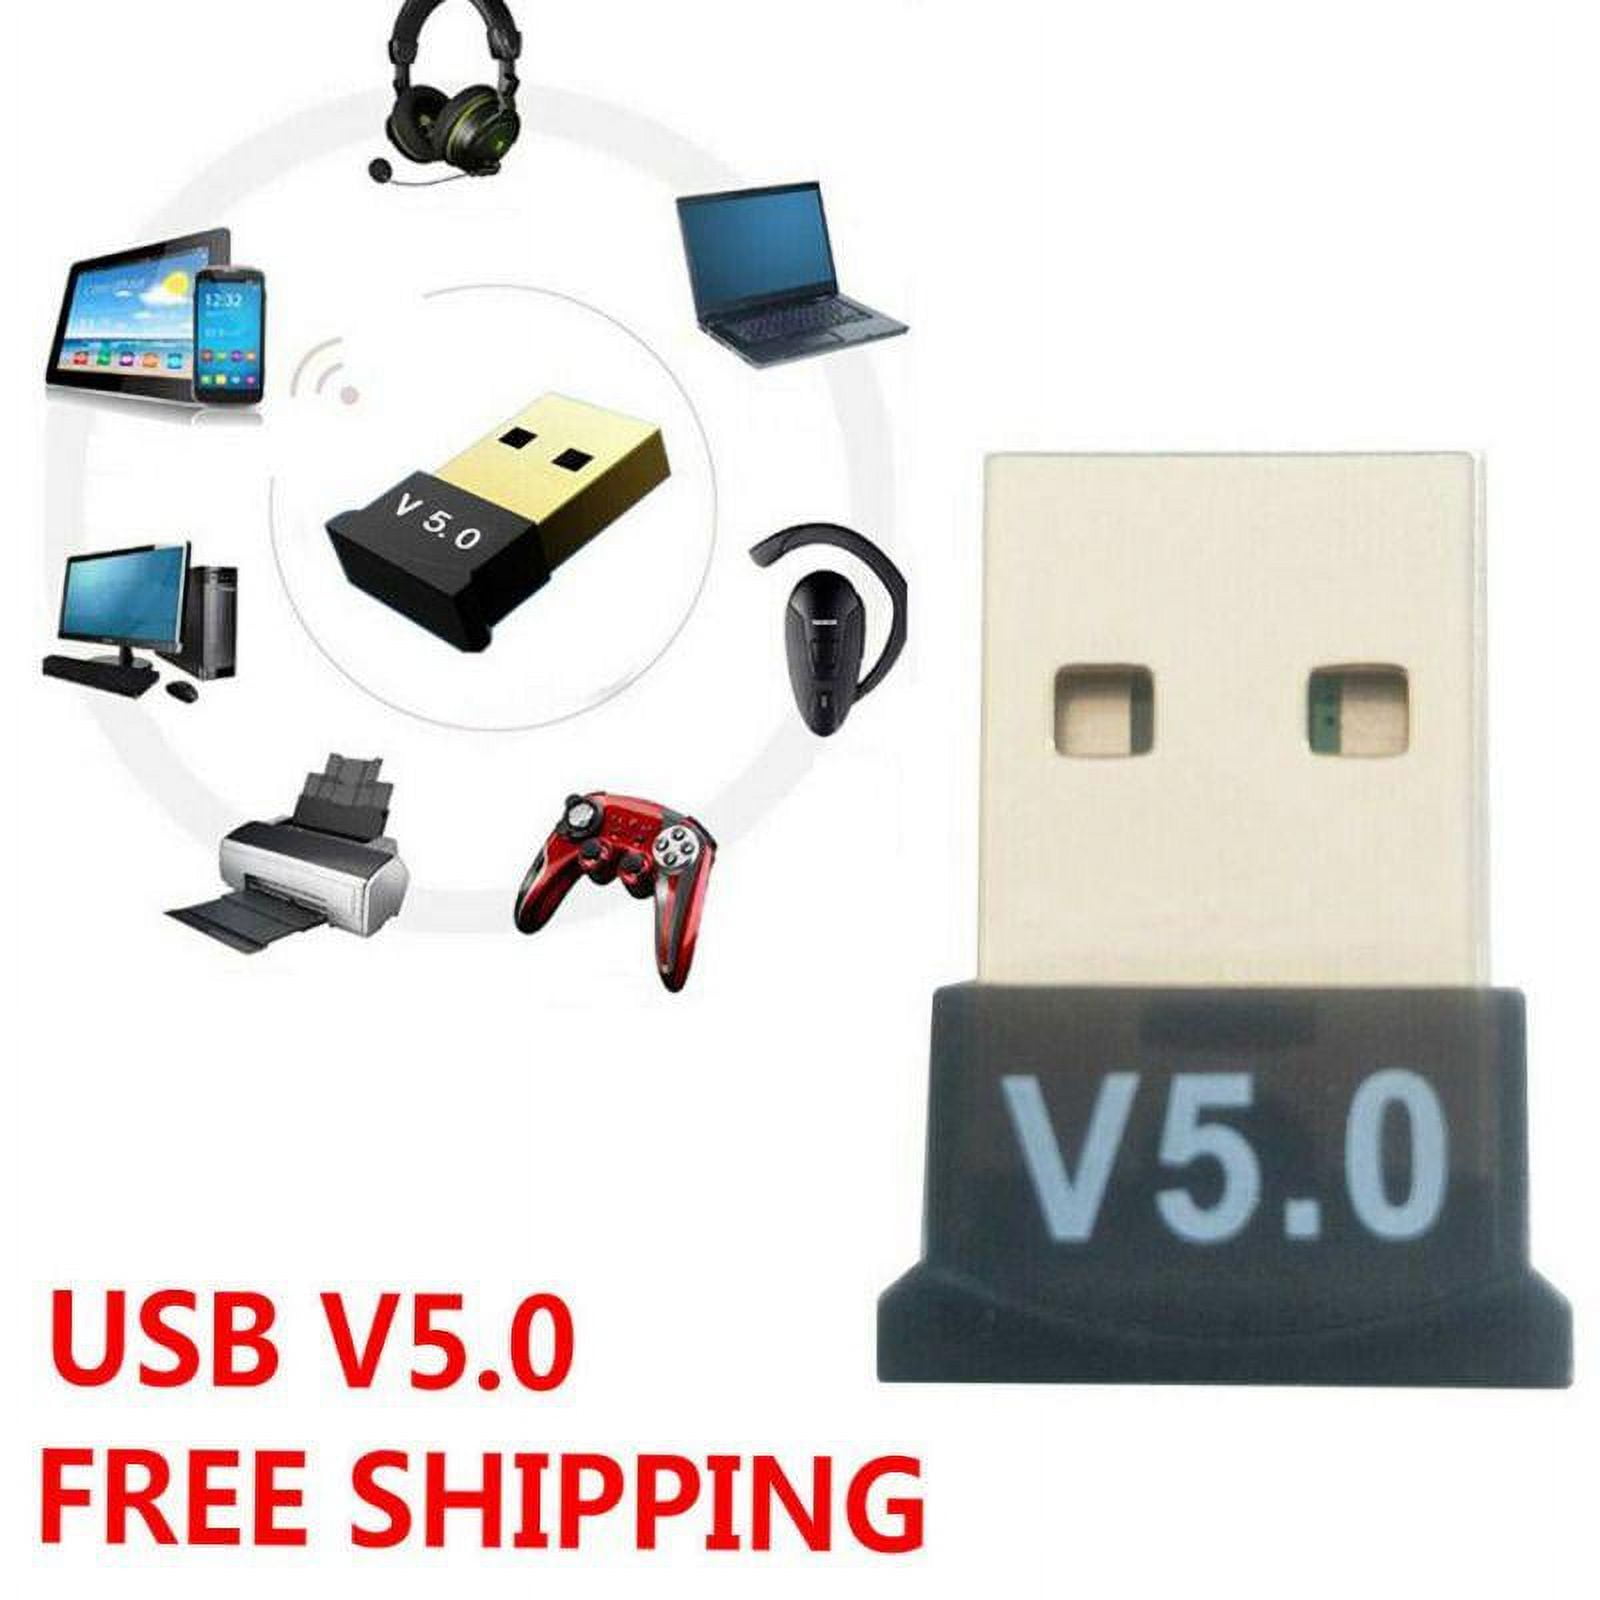 Celltophone 5.0 USB Ultra-Mini Bluetooth Dongle Adapter for Windows  Computer, Model Name/Number: V5.0 at Rs 94 in New Delhi